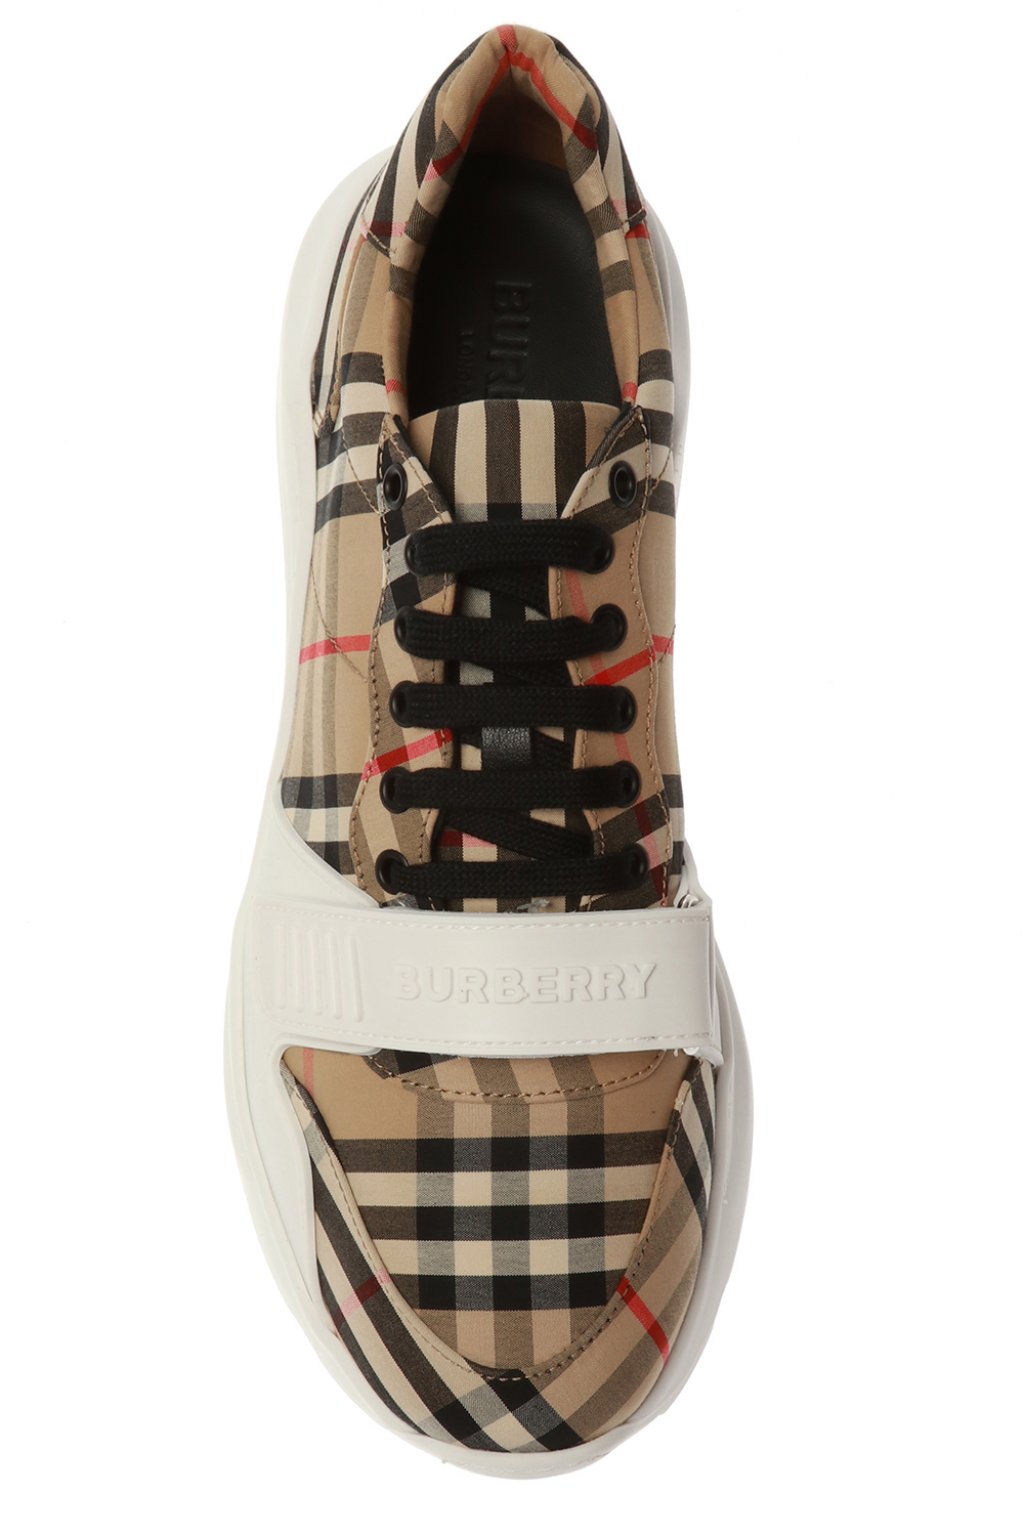 burberry bowling shoes